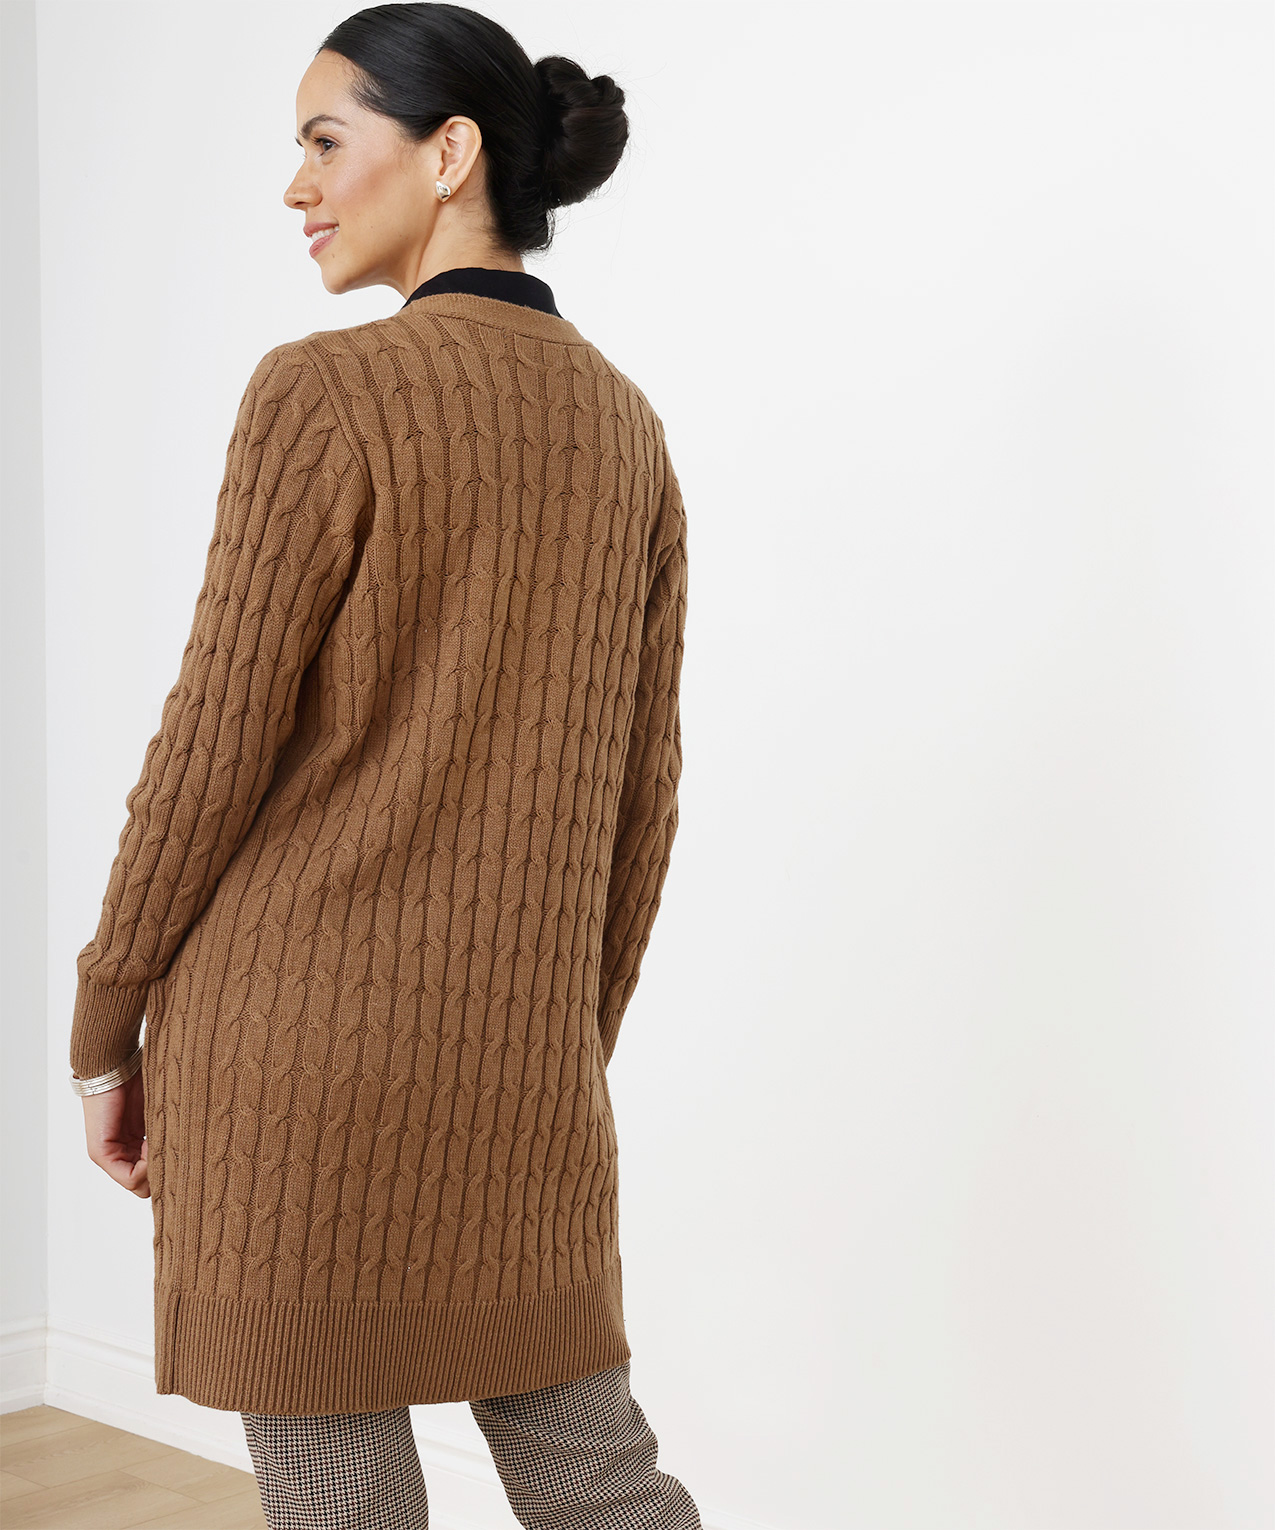 Petite Long Sleeve Cable Knit Cardigan Sweater, Cleo